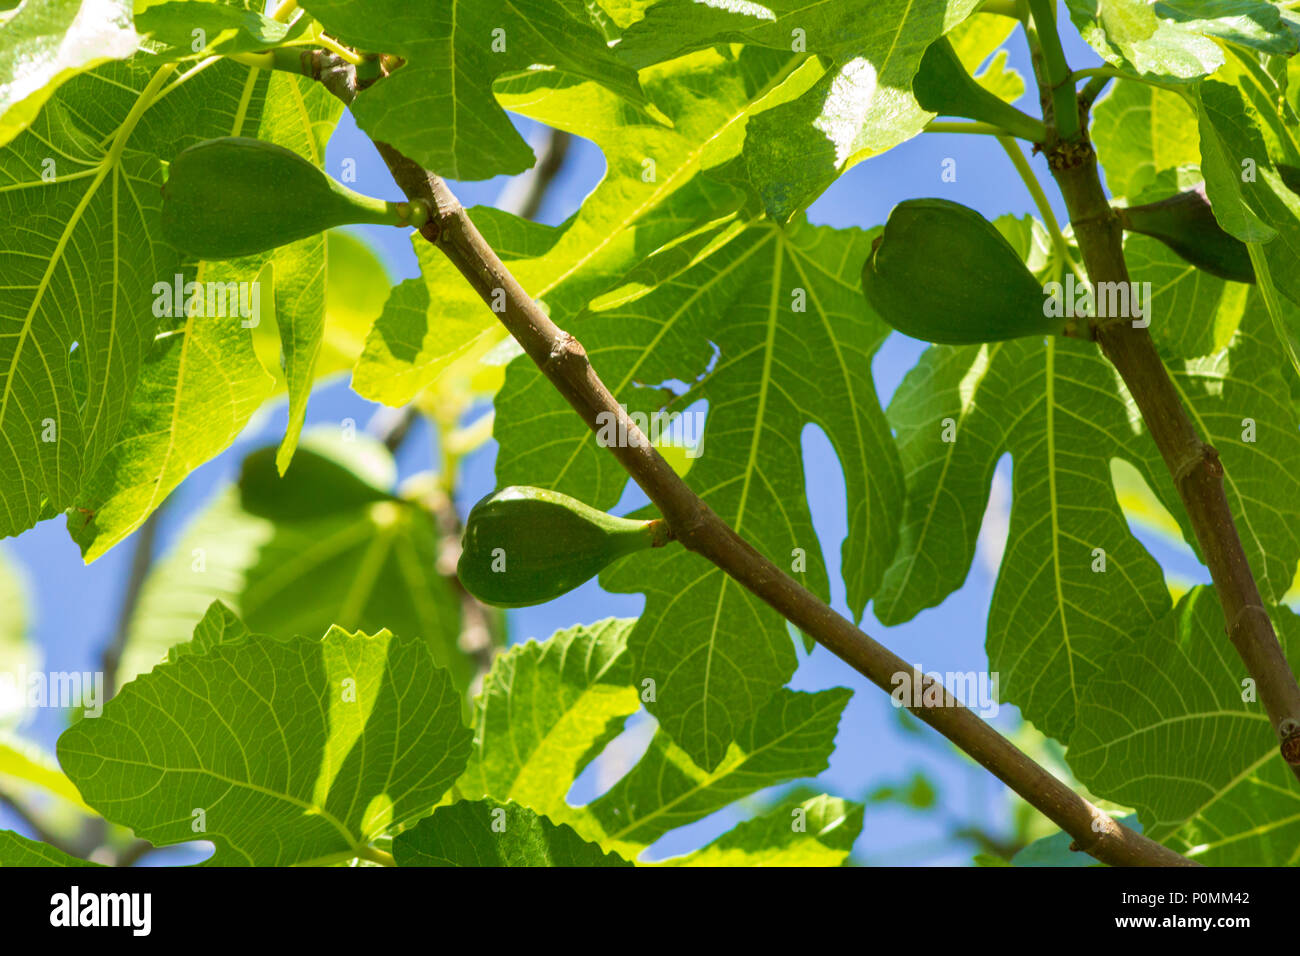 Ficus carica, Common fig tree coming into fruit, Andalucia Spain Stock Photo